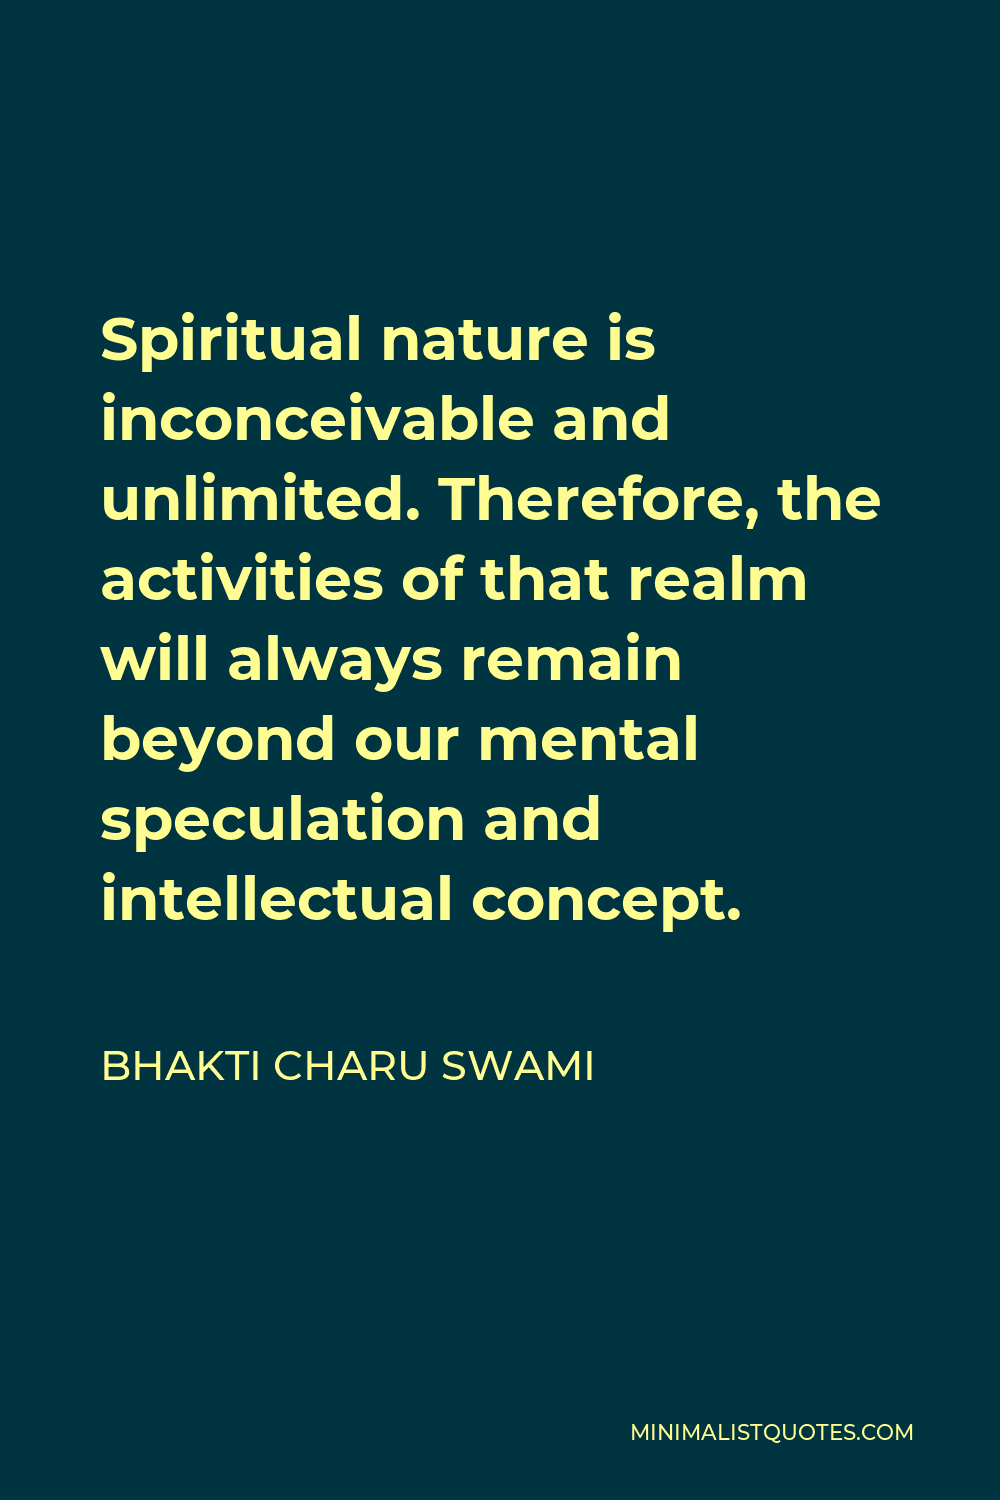 Bhakti Charu Swami Quote - Spiritual nature is inconceivable and unlimited. Therefore, the activities of that realm will always remain beyond our mental speculation and intellectual concept.